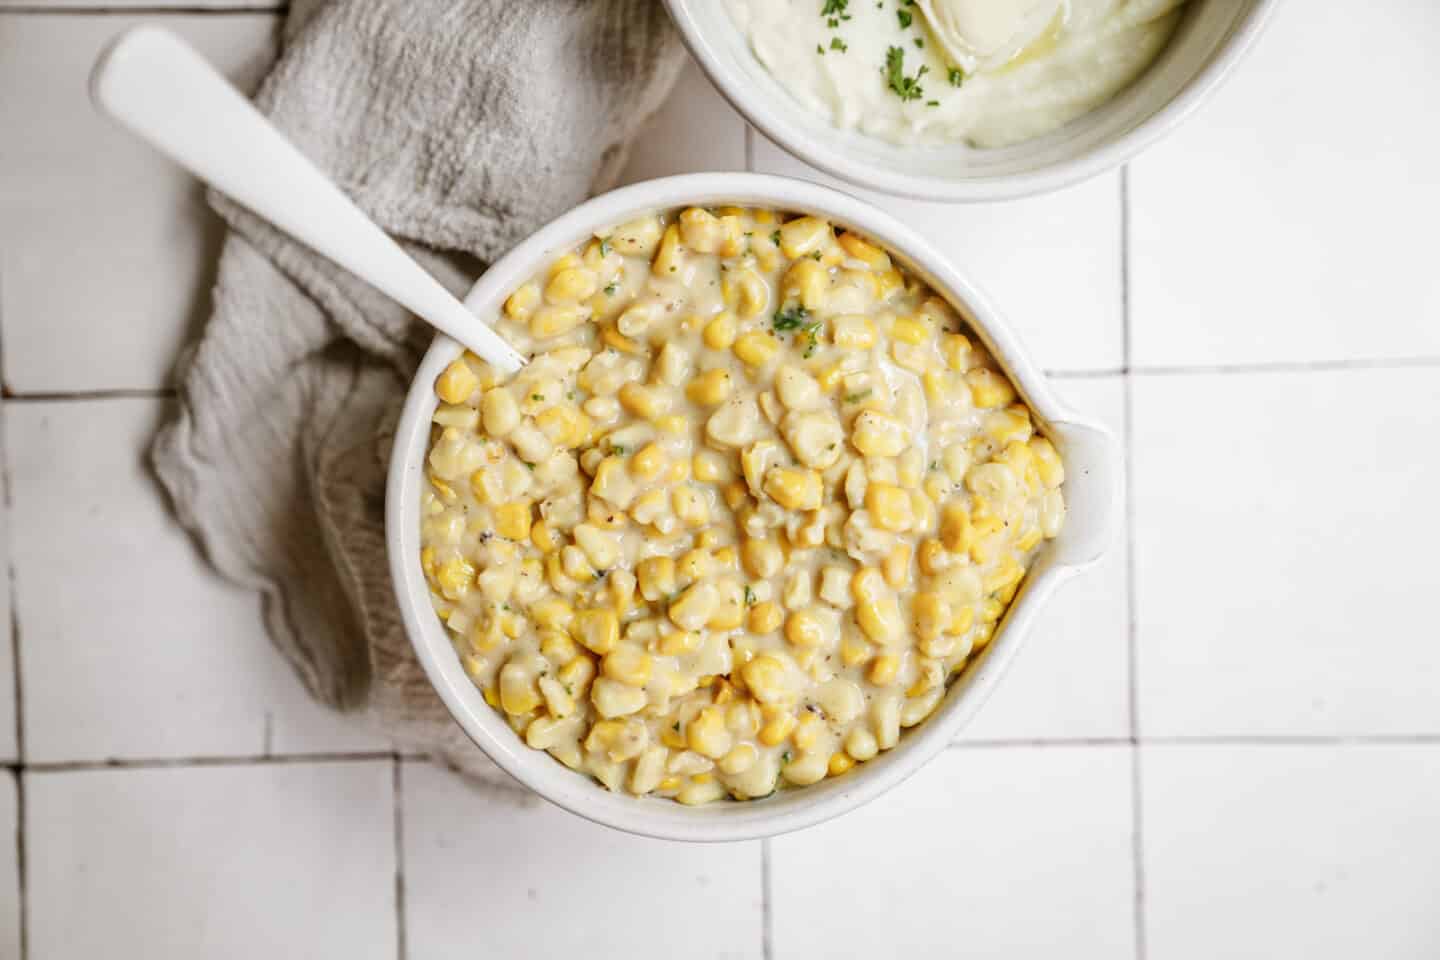 Creamed corn recipe in a serving dish on a white countertop.